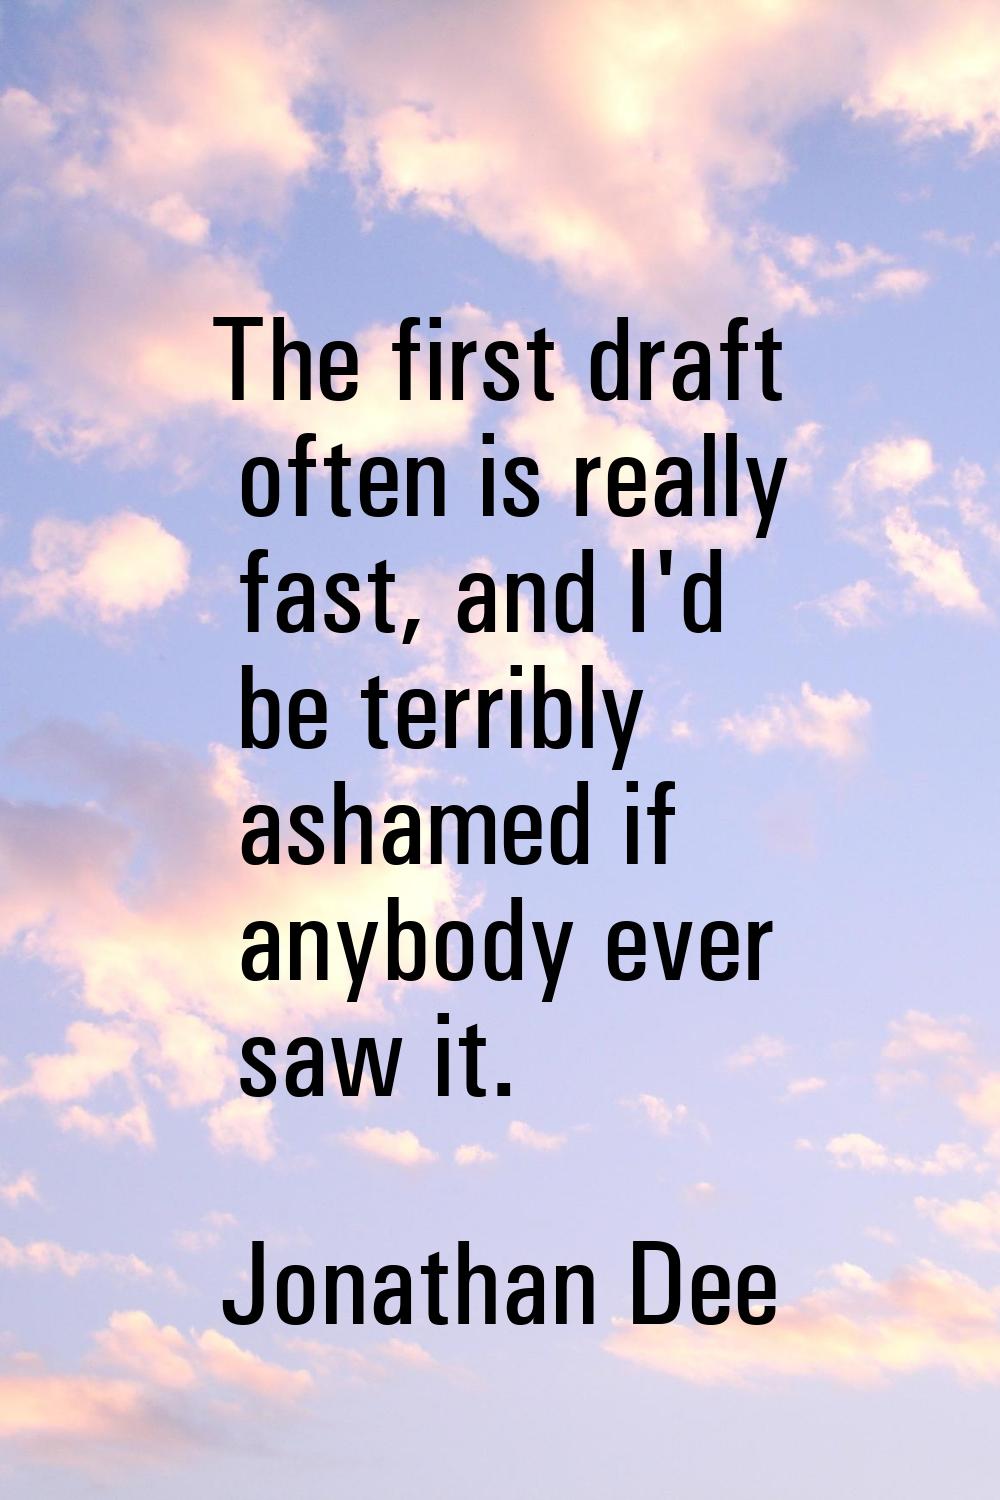 The first draft often is really fast, and I'd be terribly ashamed if anybody ever saw it.